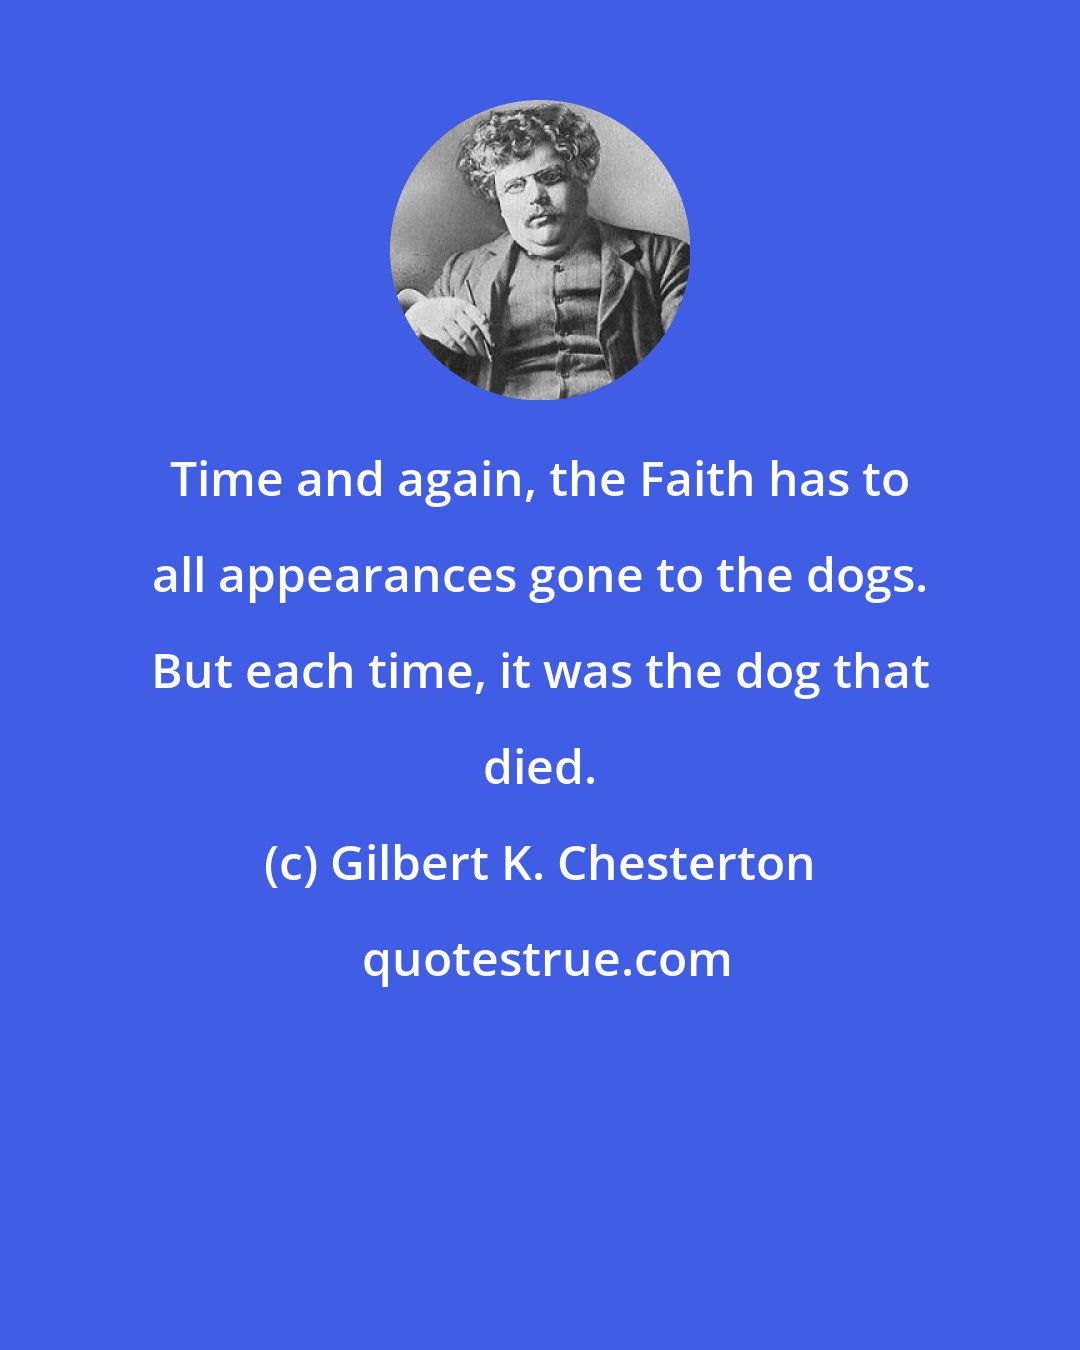 Gilbert K. Chesterton: Time and again, the Faith has to all appearances gone to the dogs. But each time, it was the dog that died.